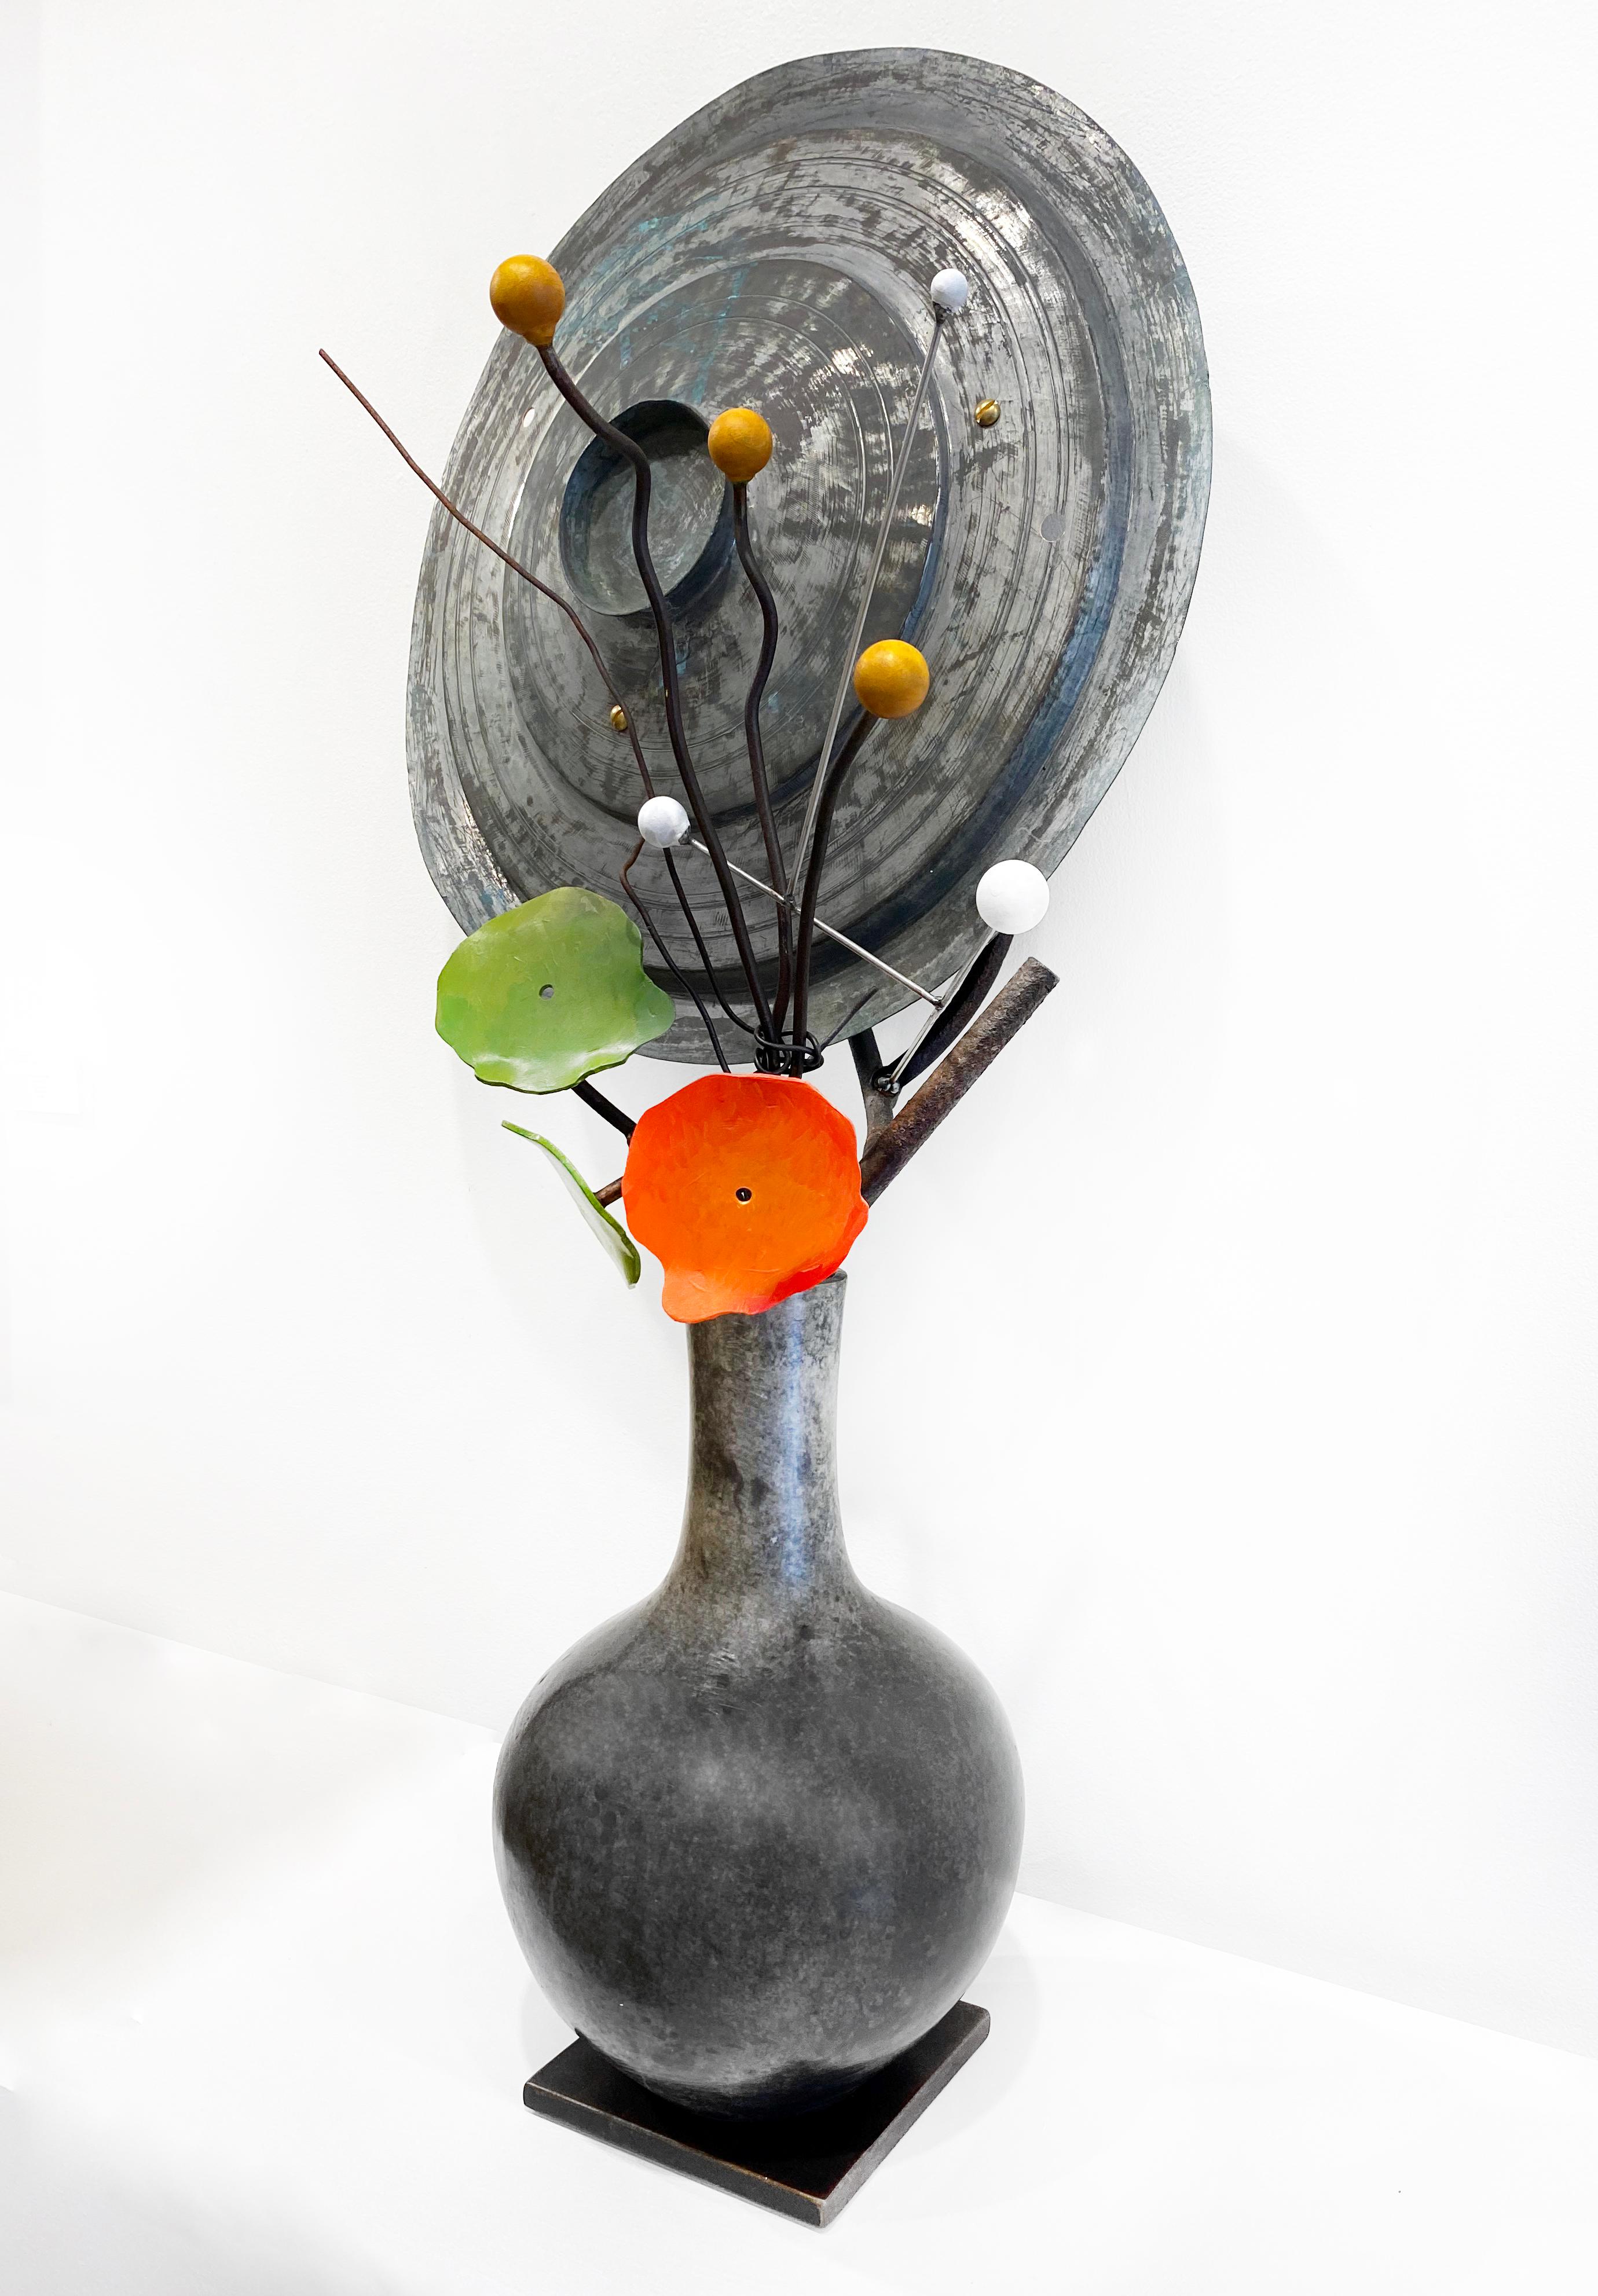 'Planets, Seeds, Nasturtium' by David Kimball Anderson, 2022. Bronze, steel, and paint, 36 x 17 x 10 in. This sculpture features a rounded vase cast in bronze and finished in patinas of grey. It features a series of bronze branches and two steel